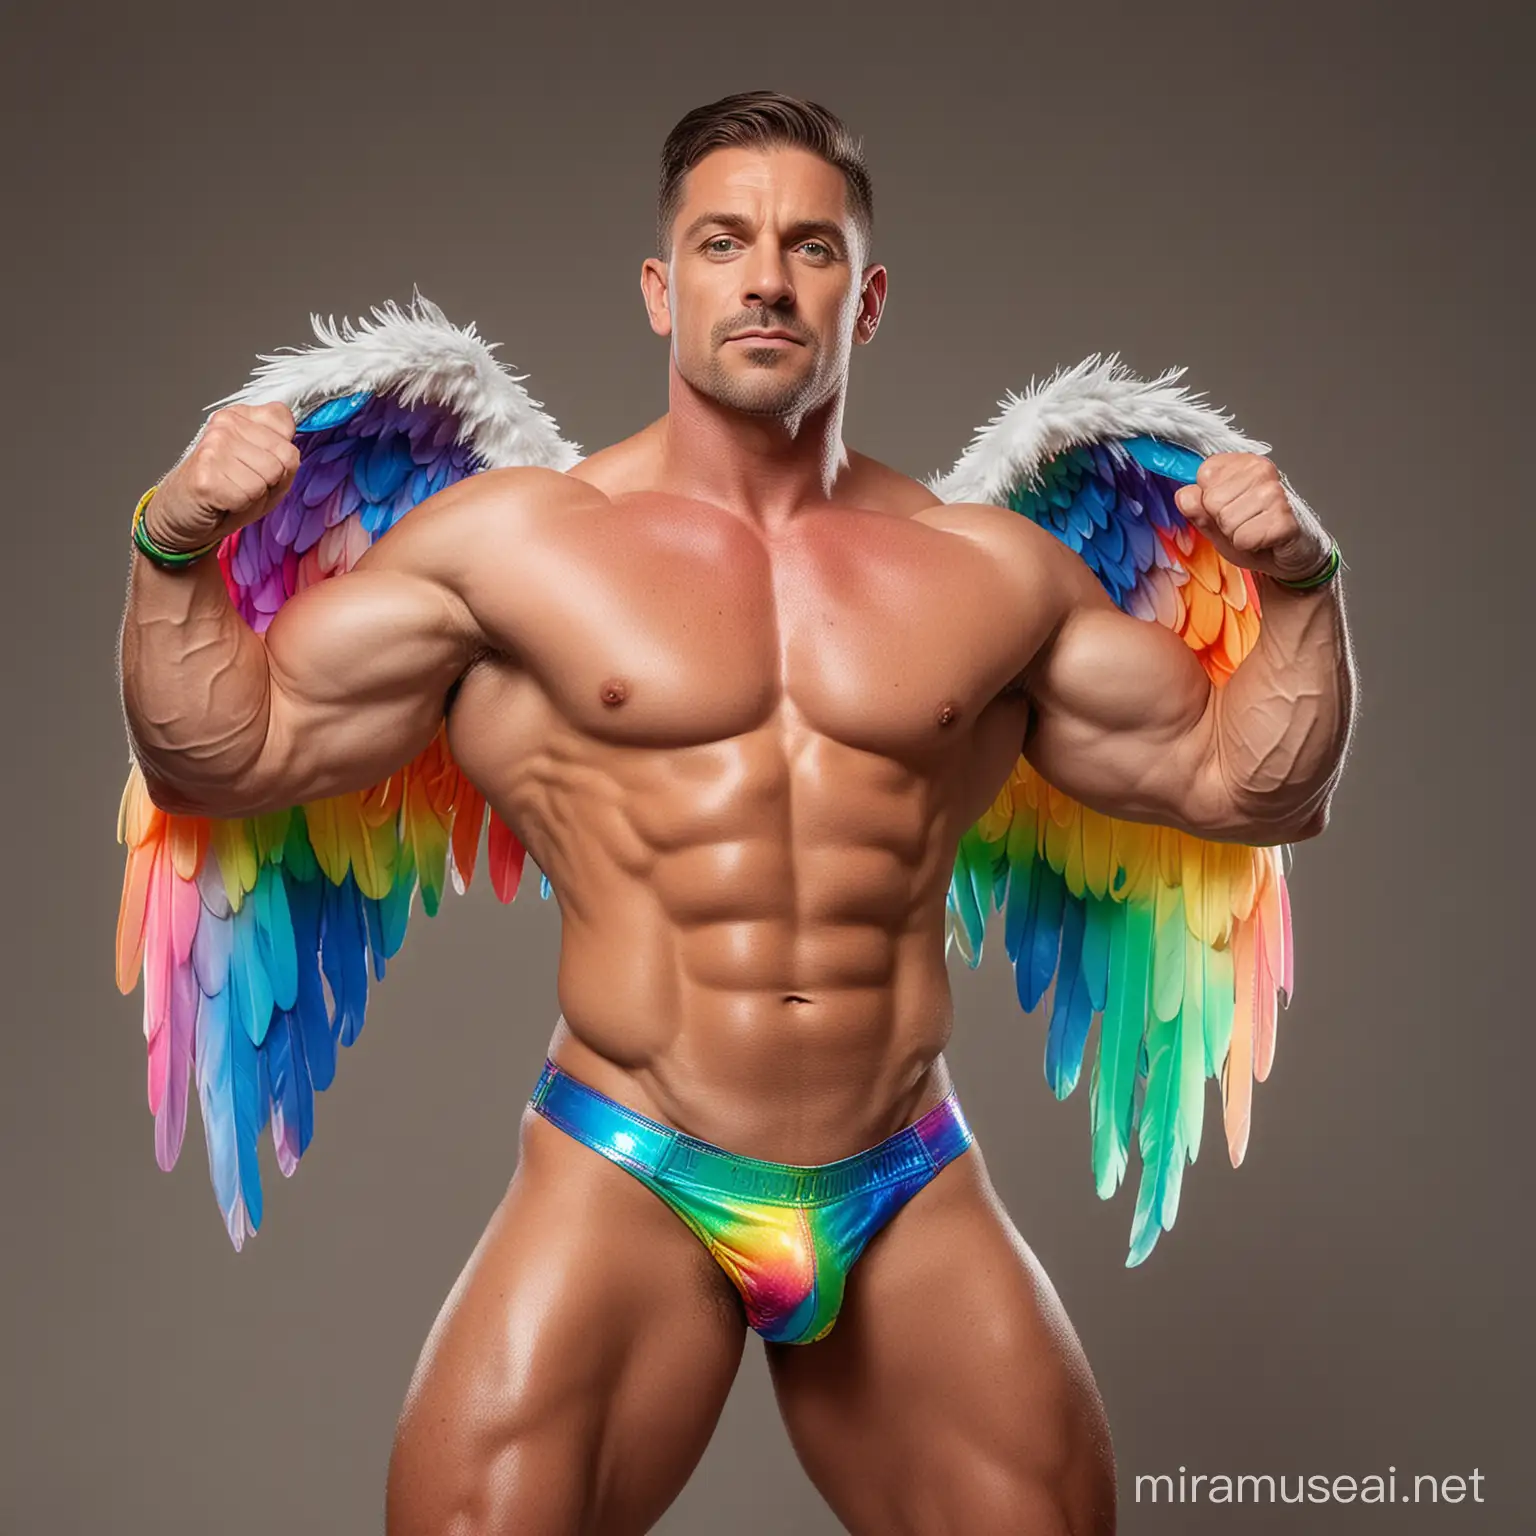 Studio Light Topless 30s Ultra Chunky IFBB Bodybuilder Daddy with Beautiful Big Green Eyes wearing Multi-Highlighter Bright Rainbow with white Coloured See Through Eagle Wings Shoulder LED Jacket Short shorts left arm Flexing Bicep Up Pose seating on